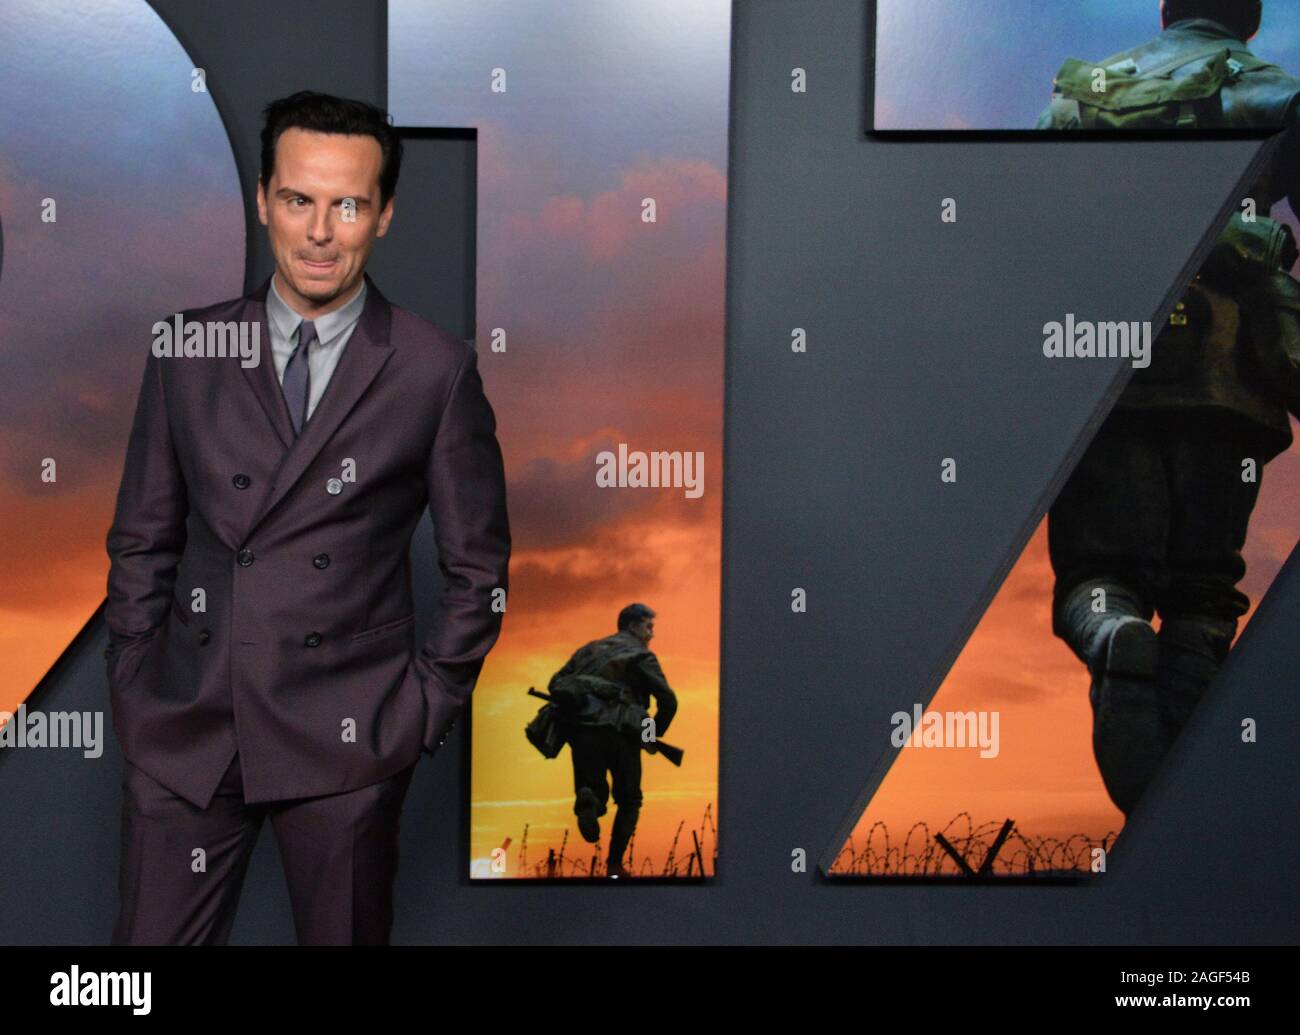 Los Angeles, United States. 18th Dec, 2019. Cast member Andrew Scott attends the premiere of the motion picture war drama '1917' at the TCL Chinese Theatre in the Hollywood section of Los Angeles on Wednesday, December 18, 2019. Storyline: Two young British privates during the First World War are given an impossible mission: deliver a message deep in enemy territory that will stop 1,600 men, and one of the soldier's brothers, from walking straight into a deadly trap. Photo by Jim Ruymen/UPI Credit: UPI/Alamy Live News Stock Photo